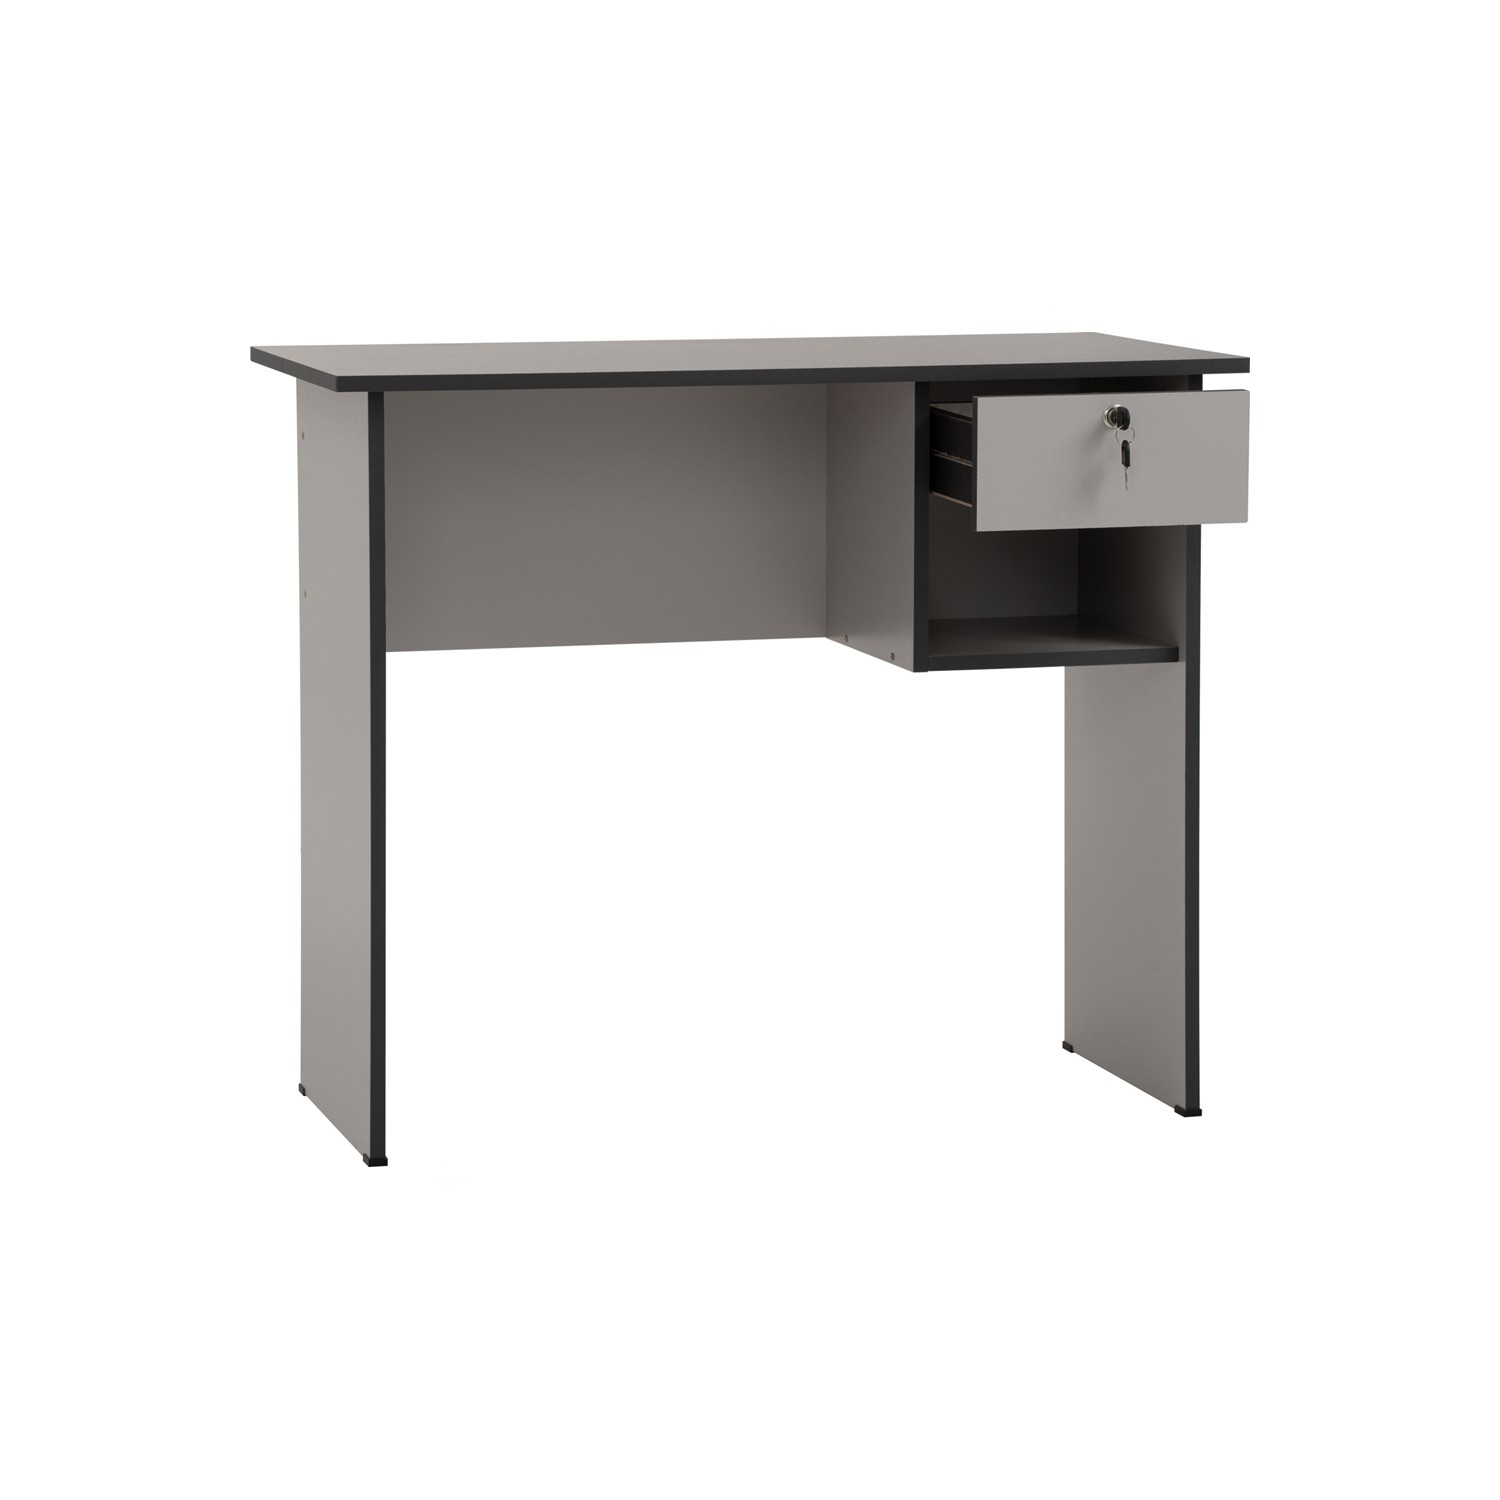 ECO 3' OFFICE TABLE GREY